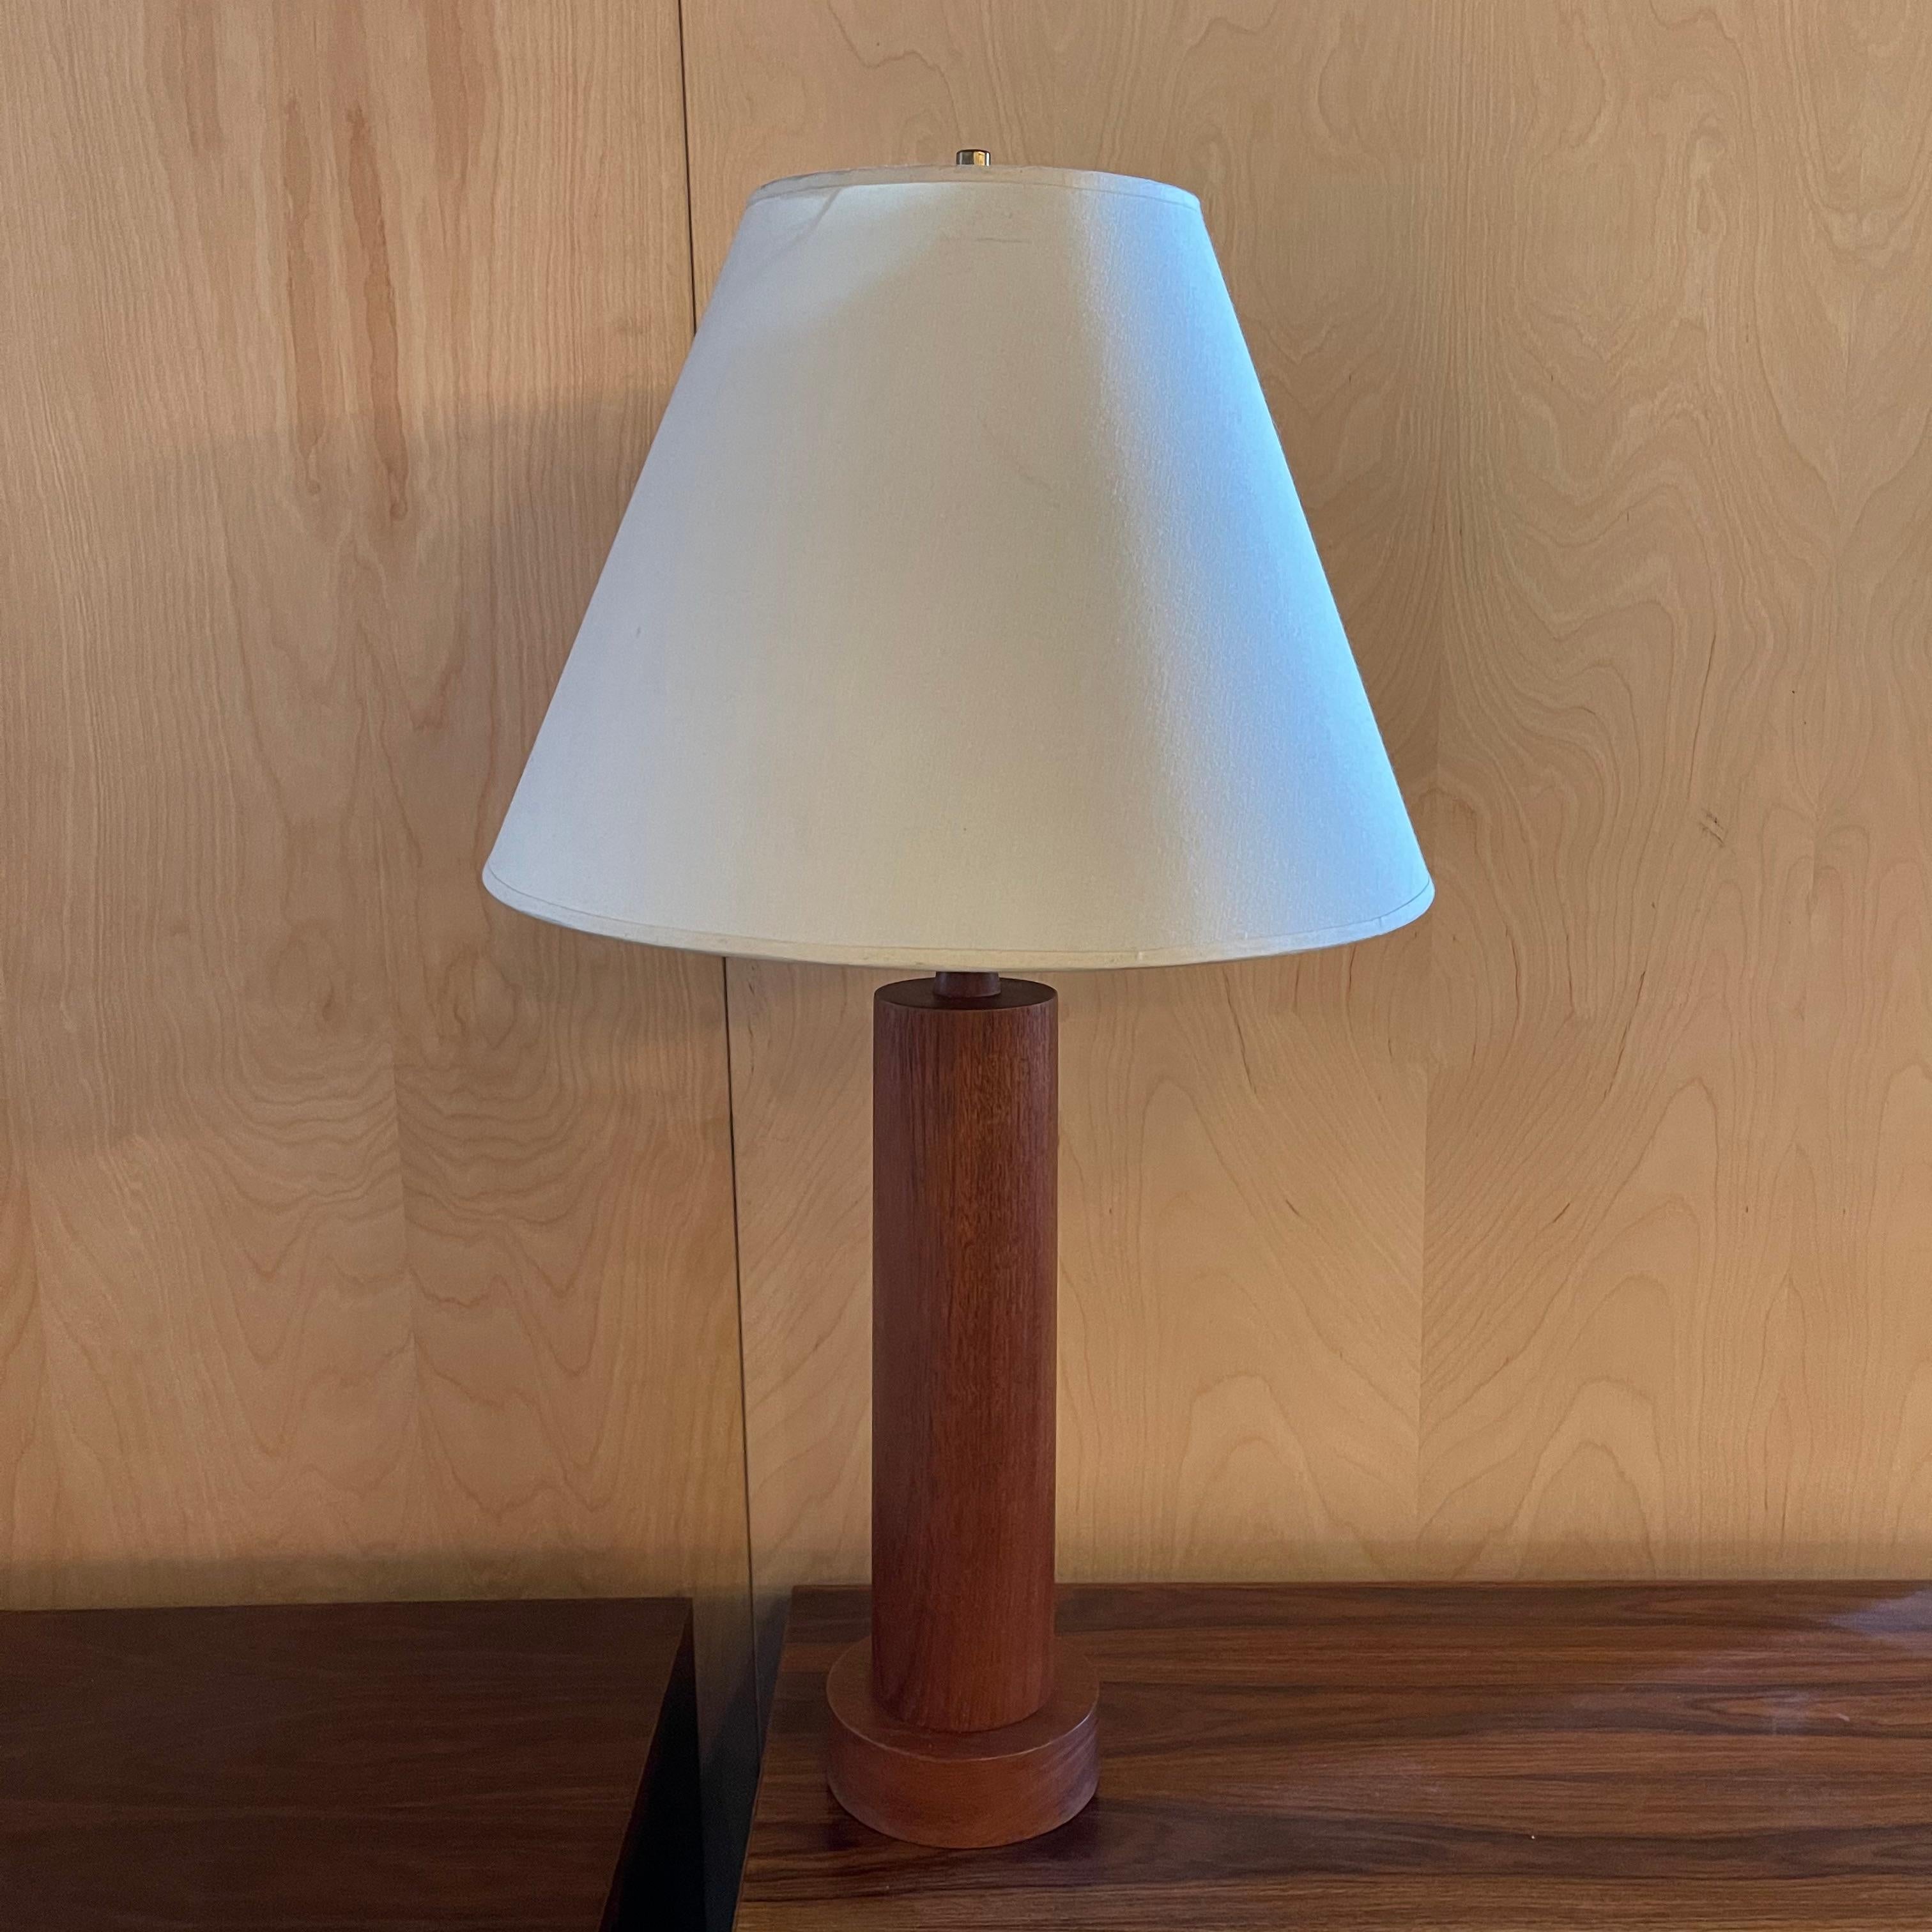 Danish modern table lamp features a solid teak cylinder base and cream linen fabric shade that measures 13 inches height x 8-18 inches diameter.